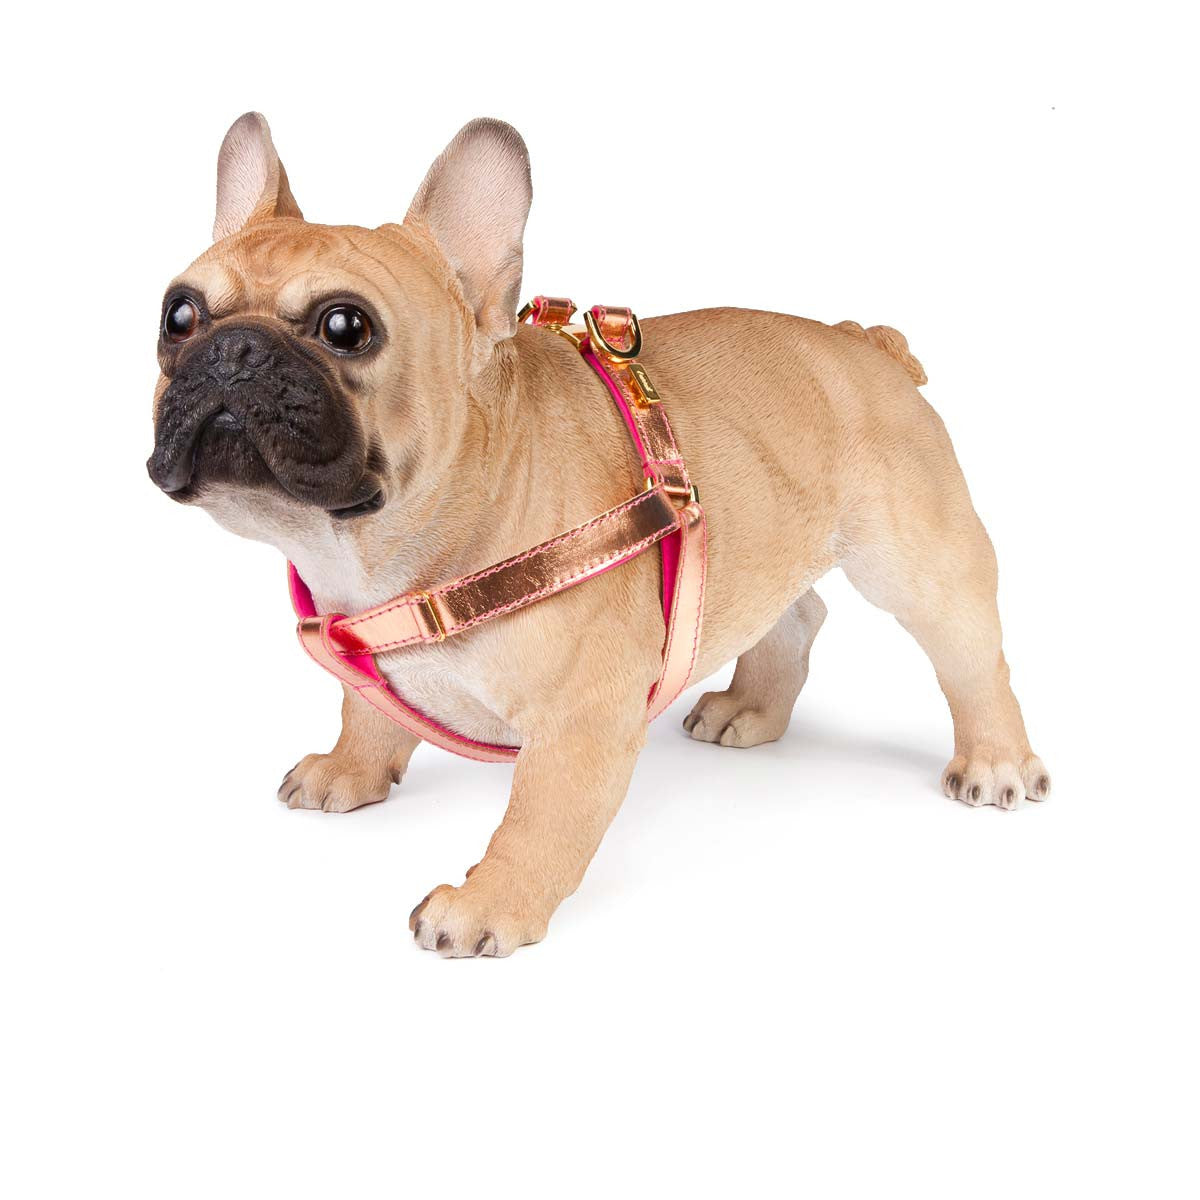 Frenchie Bulldog - (Official Site) Harnesses, Leashes & More